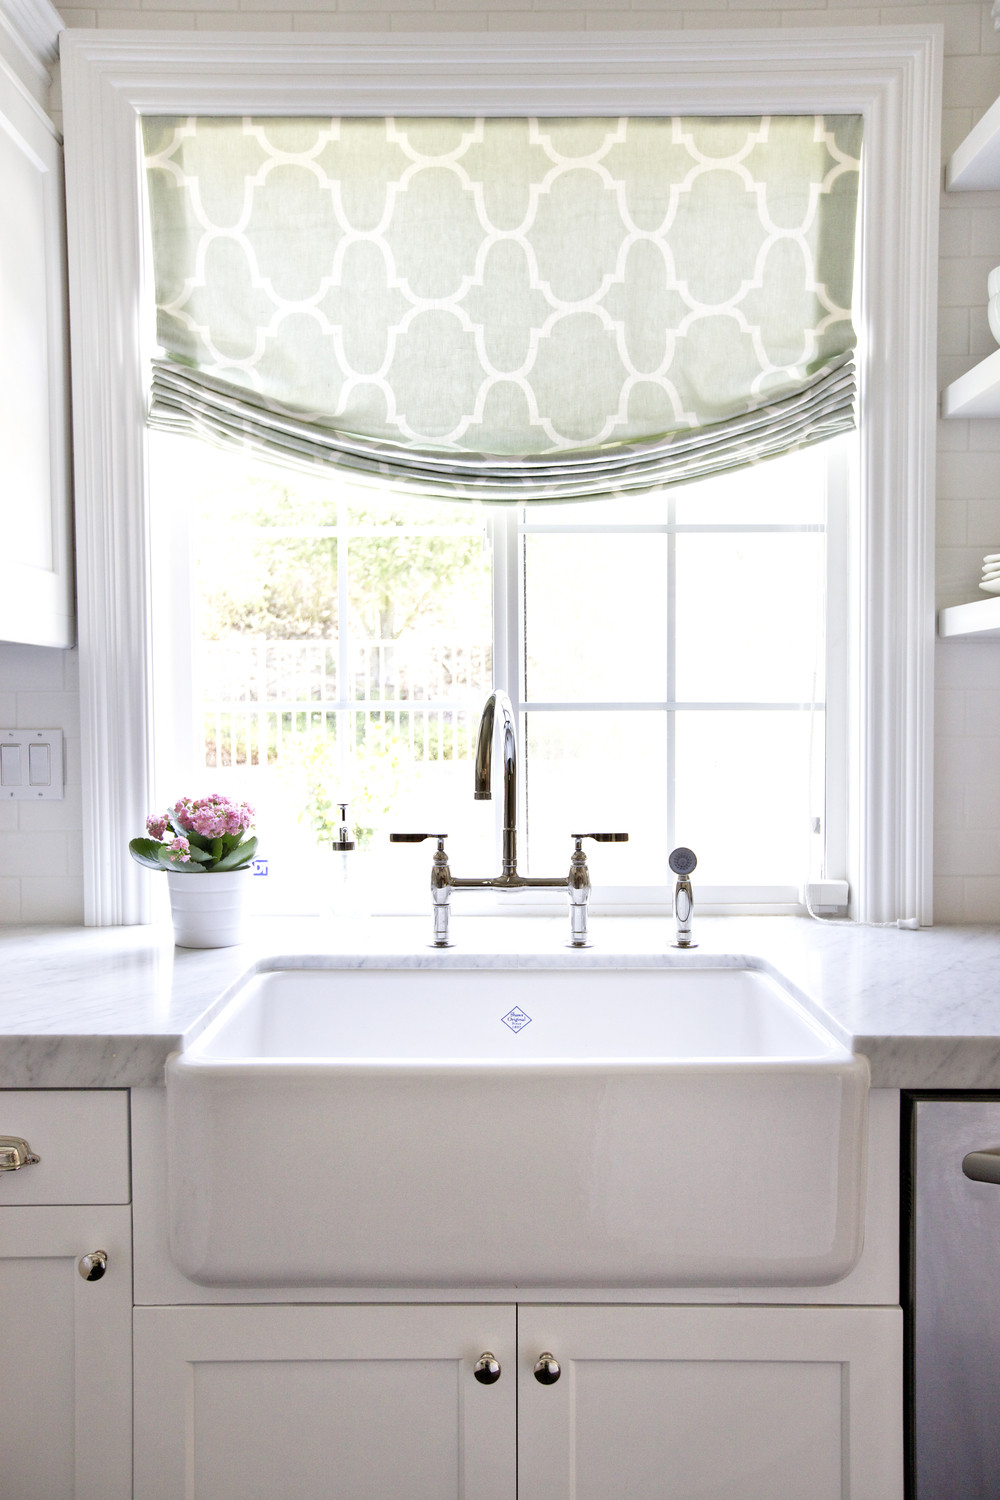 Kitchen Sink Curtains
 10 Tips on How to Choose Curtains